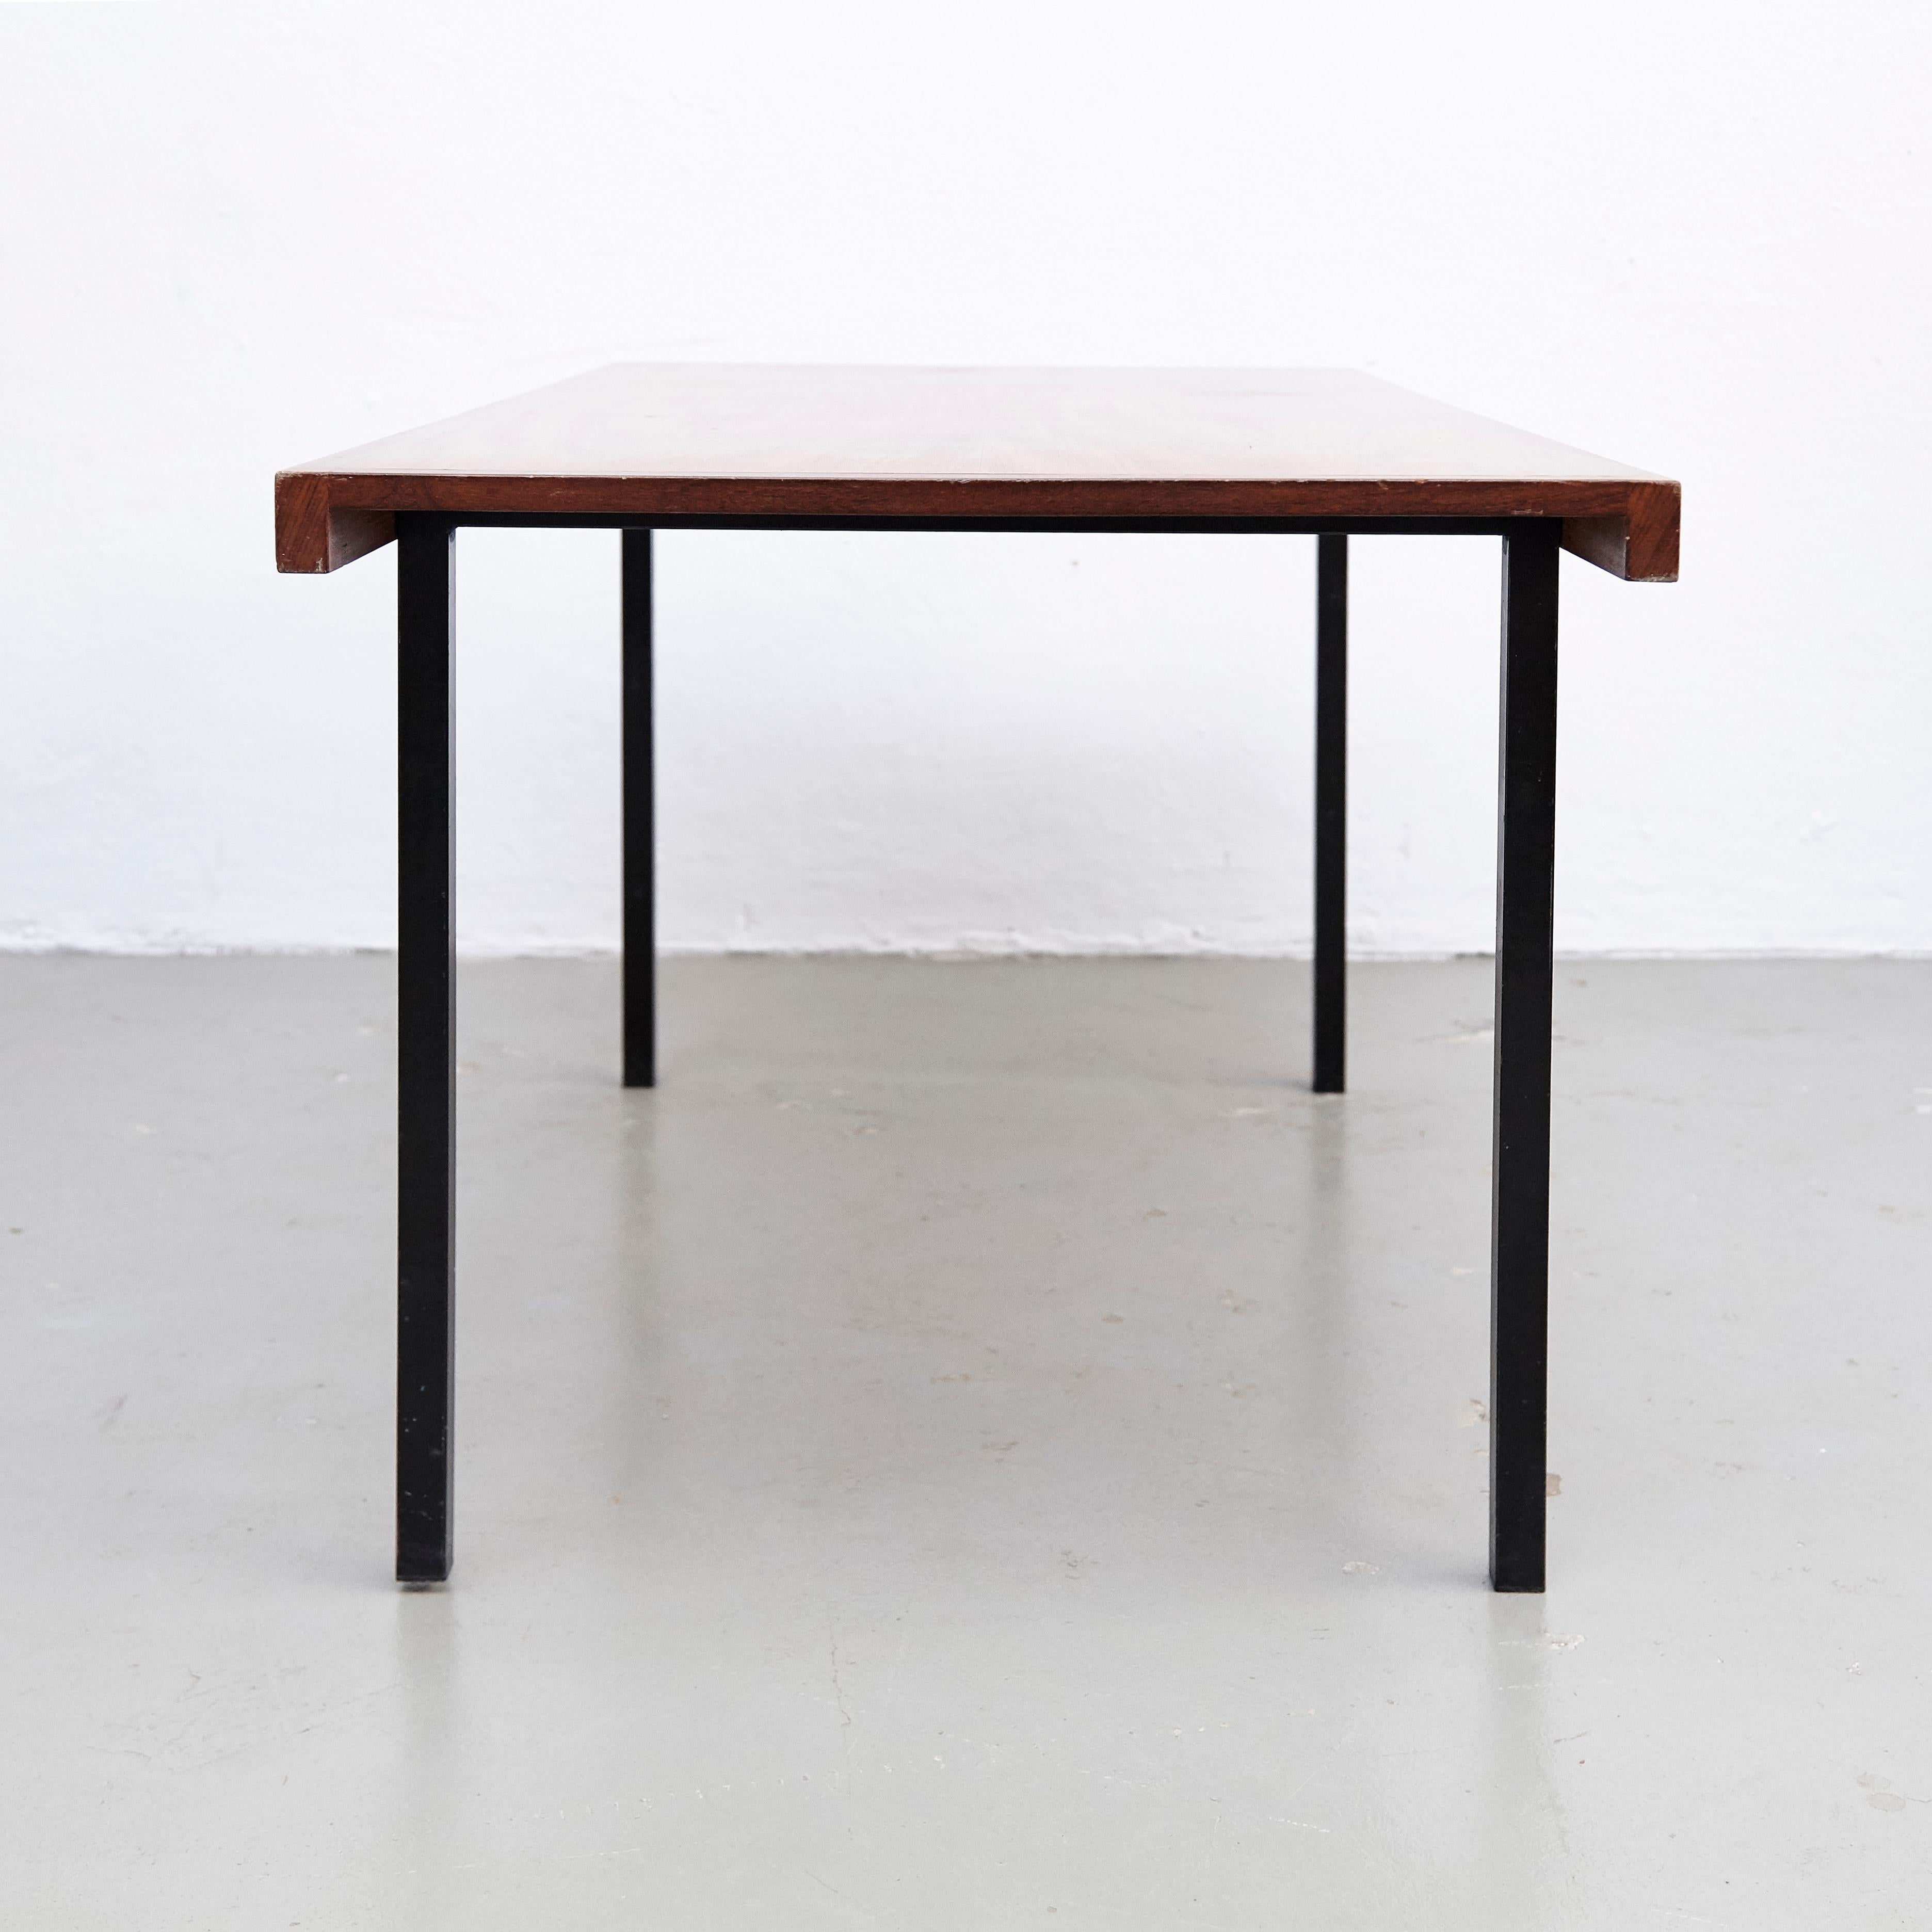 Kho Liang Le, Mid Century Modern, Wood Metal, Dining Table, circa 1950 (Mitte des 20. Jahrhunderts)